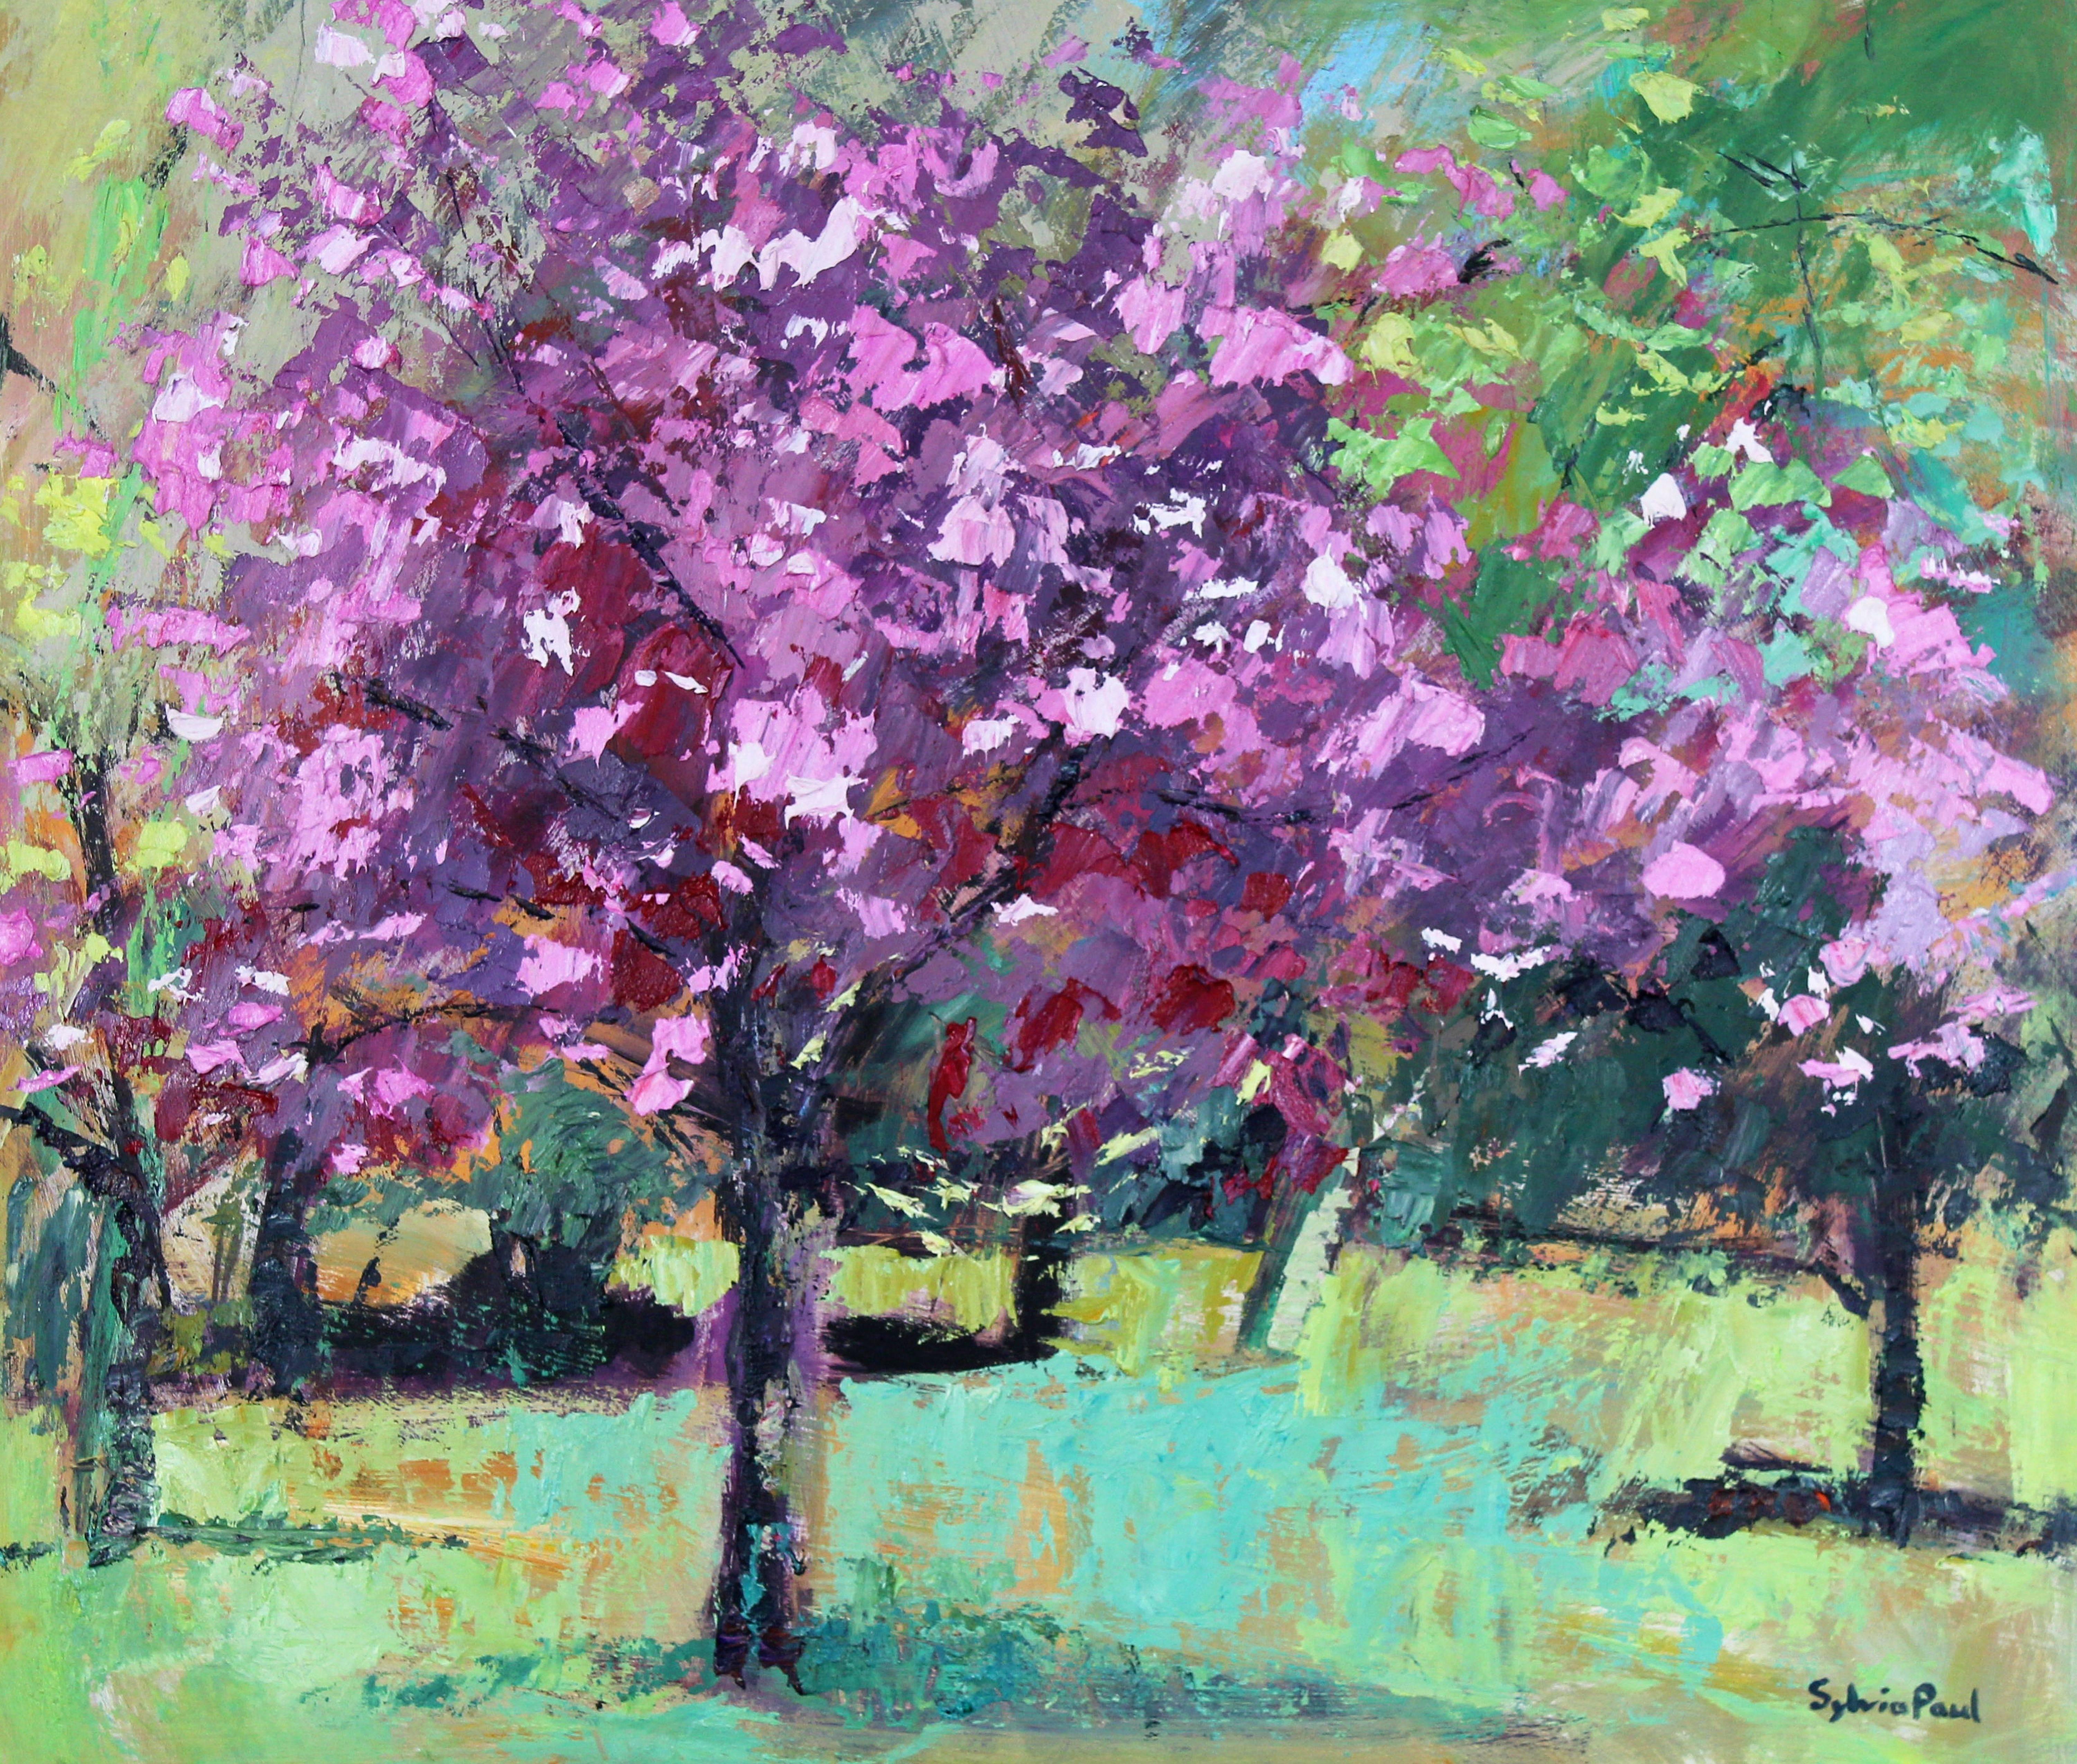 Sylvia Paul Landscape Painting - Blossom in the Park abstract Landscape painting 